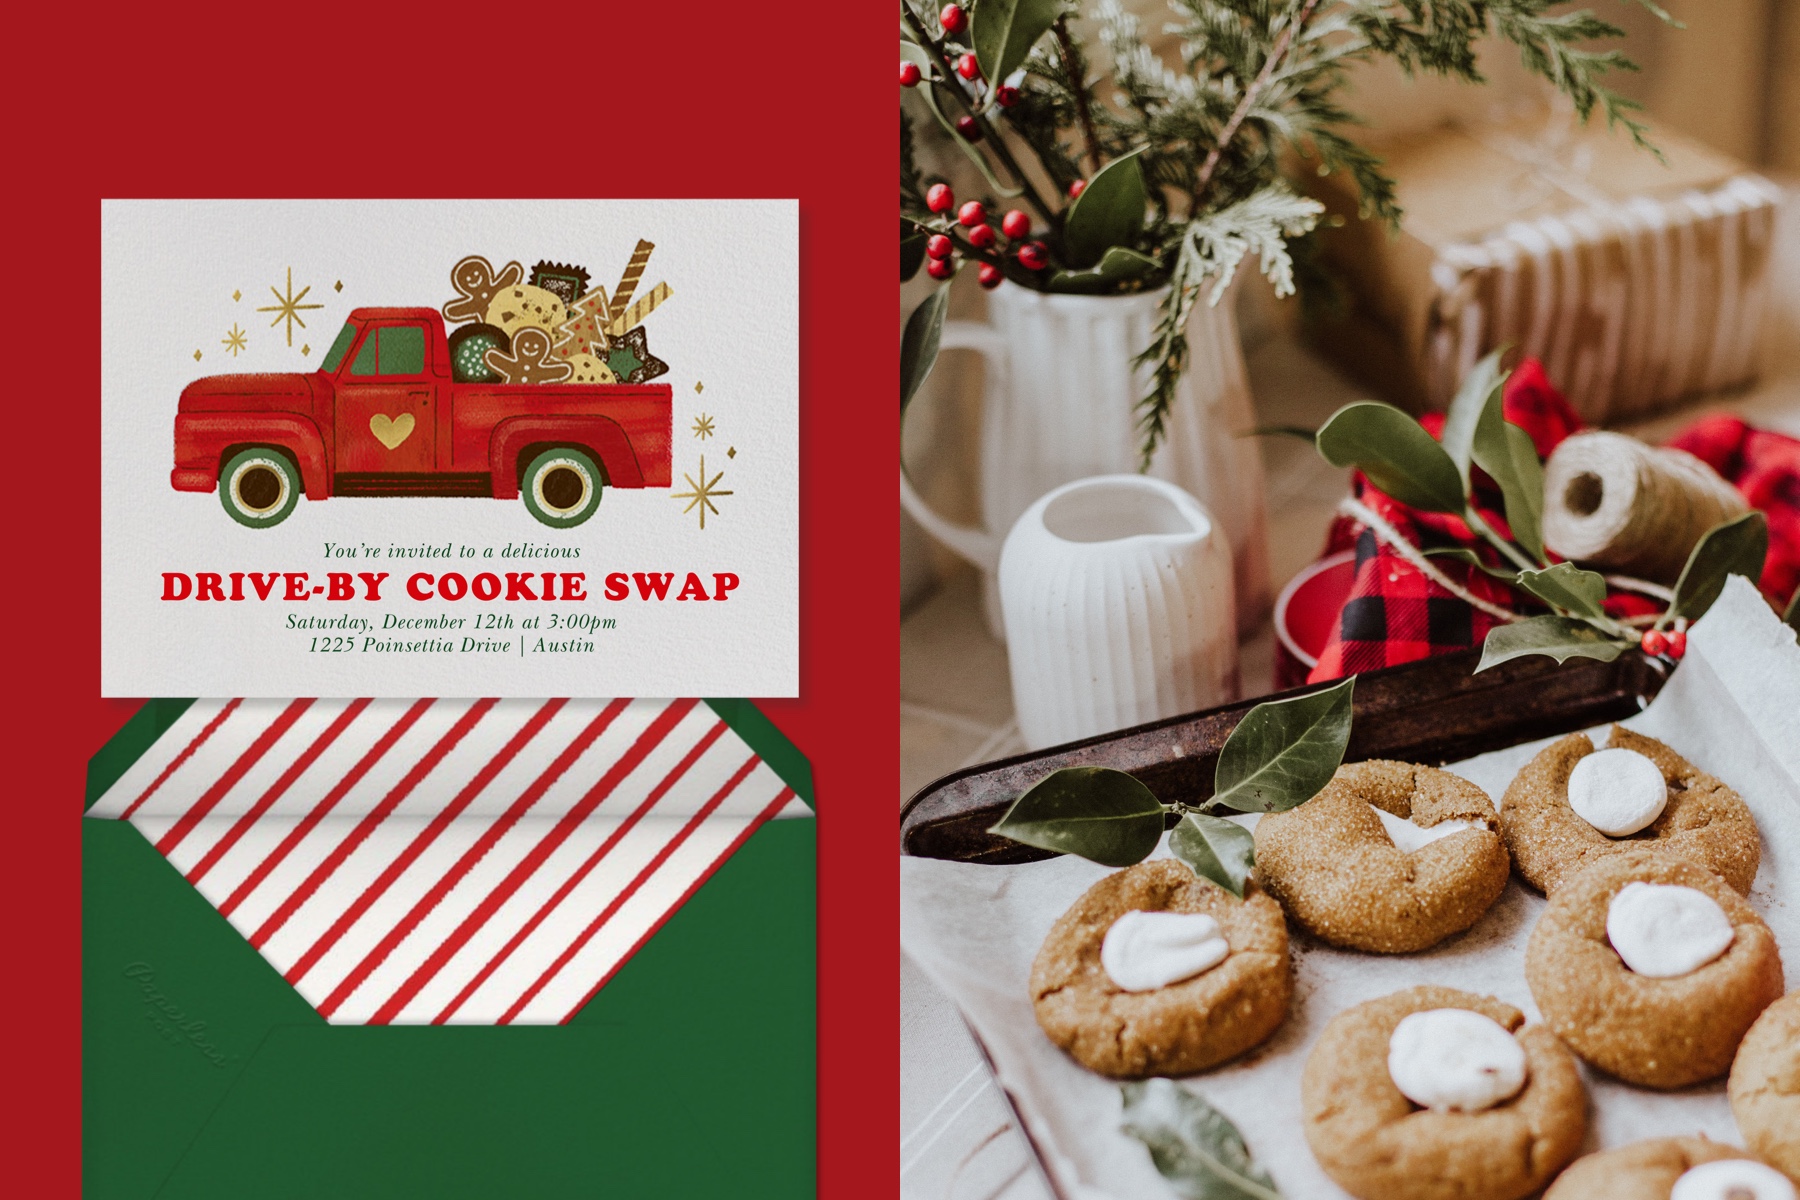 Left: An invitation for a drive-by cookie swap with a red pickup truck filled with Christmas cookies. Right: Cookies surrounded by festive decorations. 